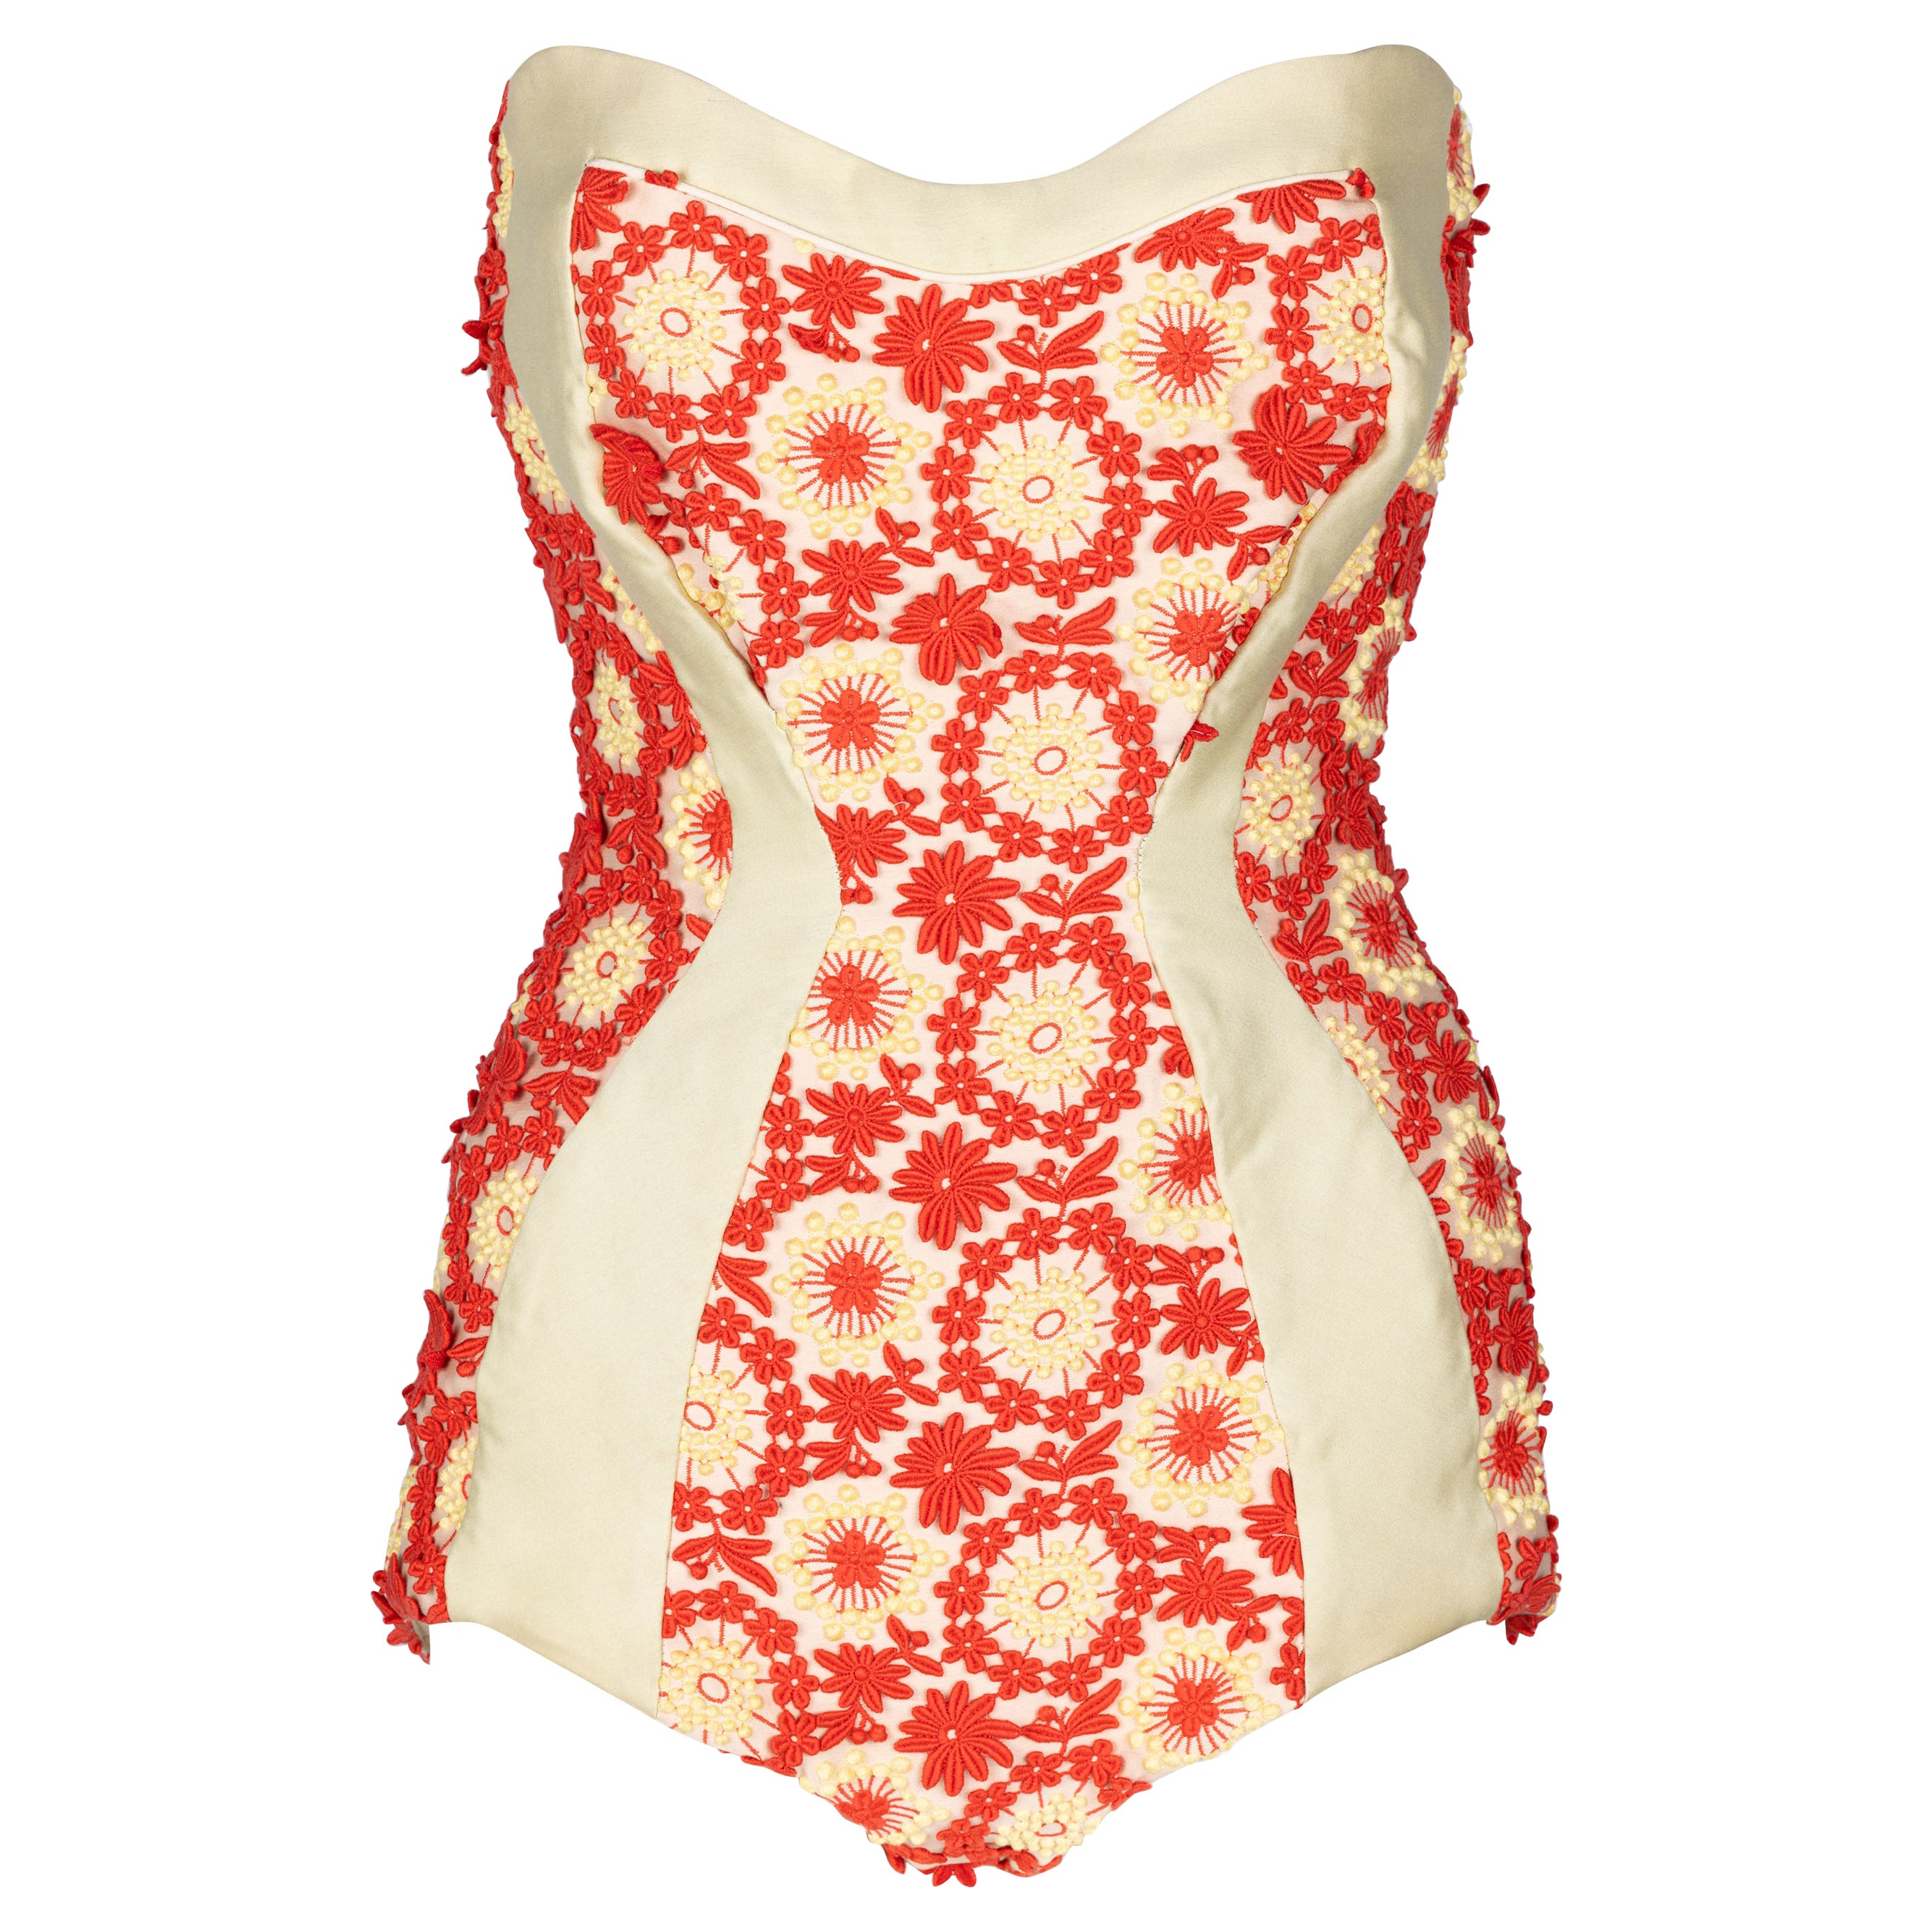 Prada Most Wanted Spring 2012 Floral Embroidered Pinup Bodysuit For Sale